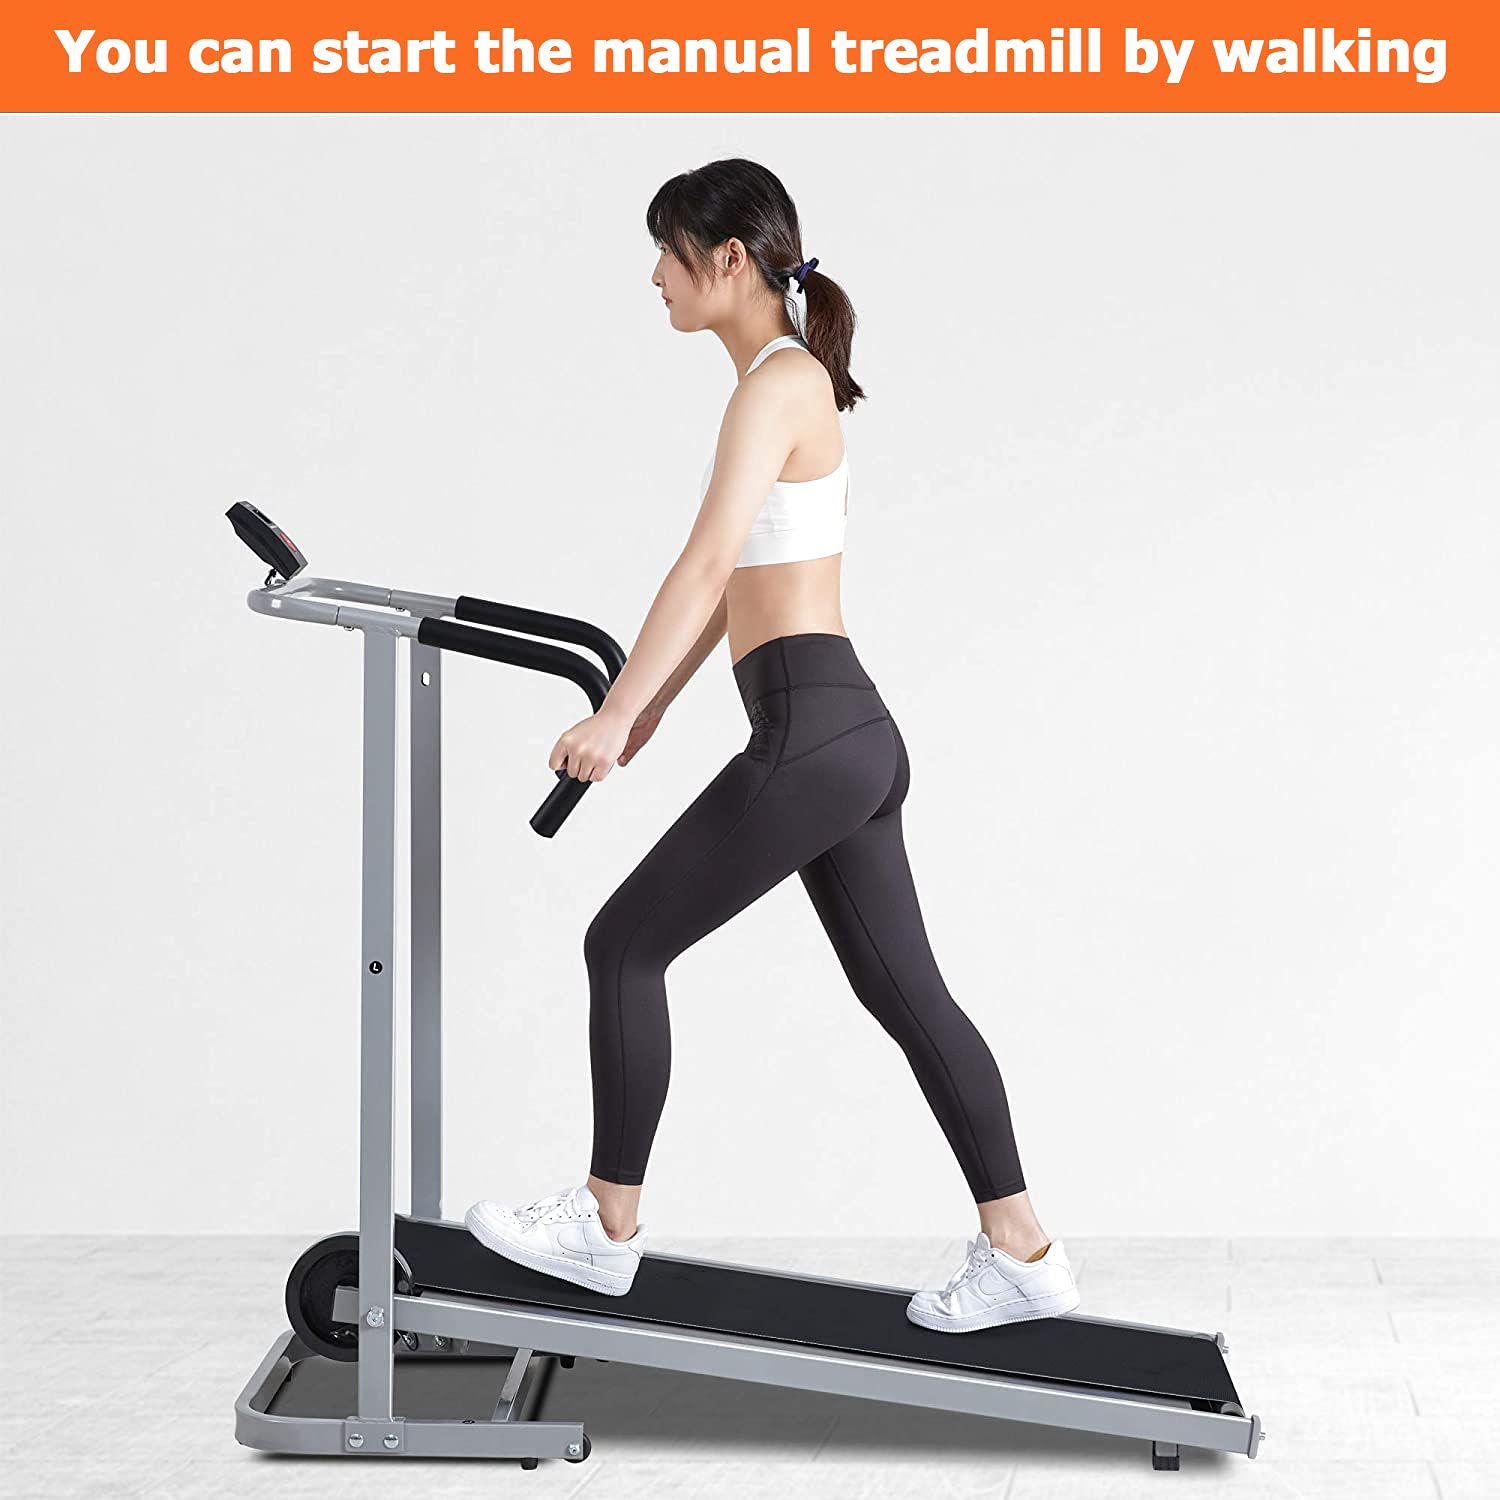 Load image into Gallery viewer, Treadmill Foldable Manual Walking Running Machine with LCD Display, Portable Wheels and Max Capacity 242 LBS for Home Use
